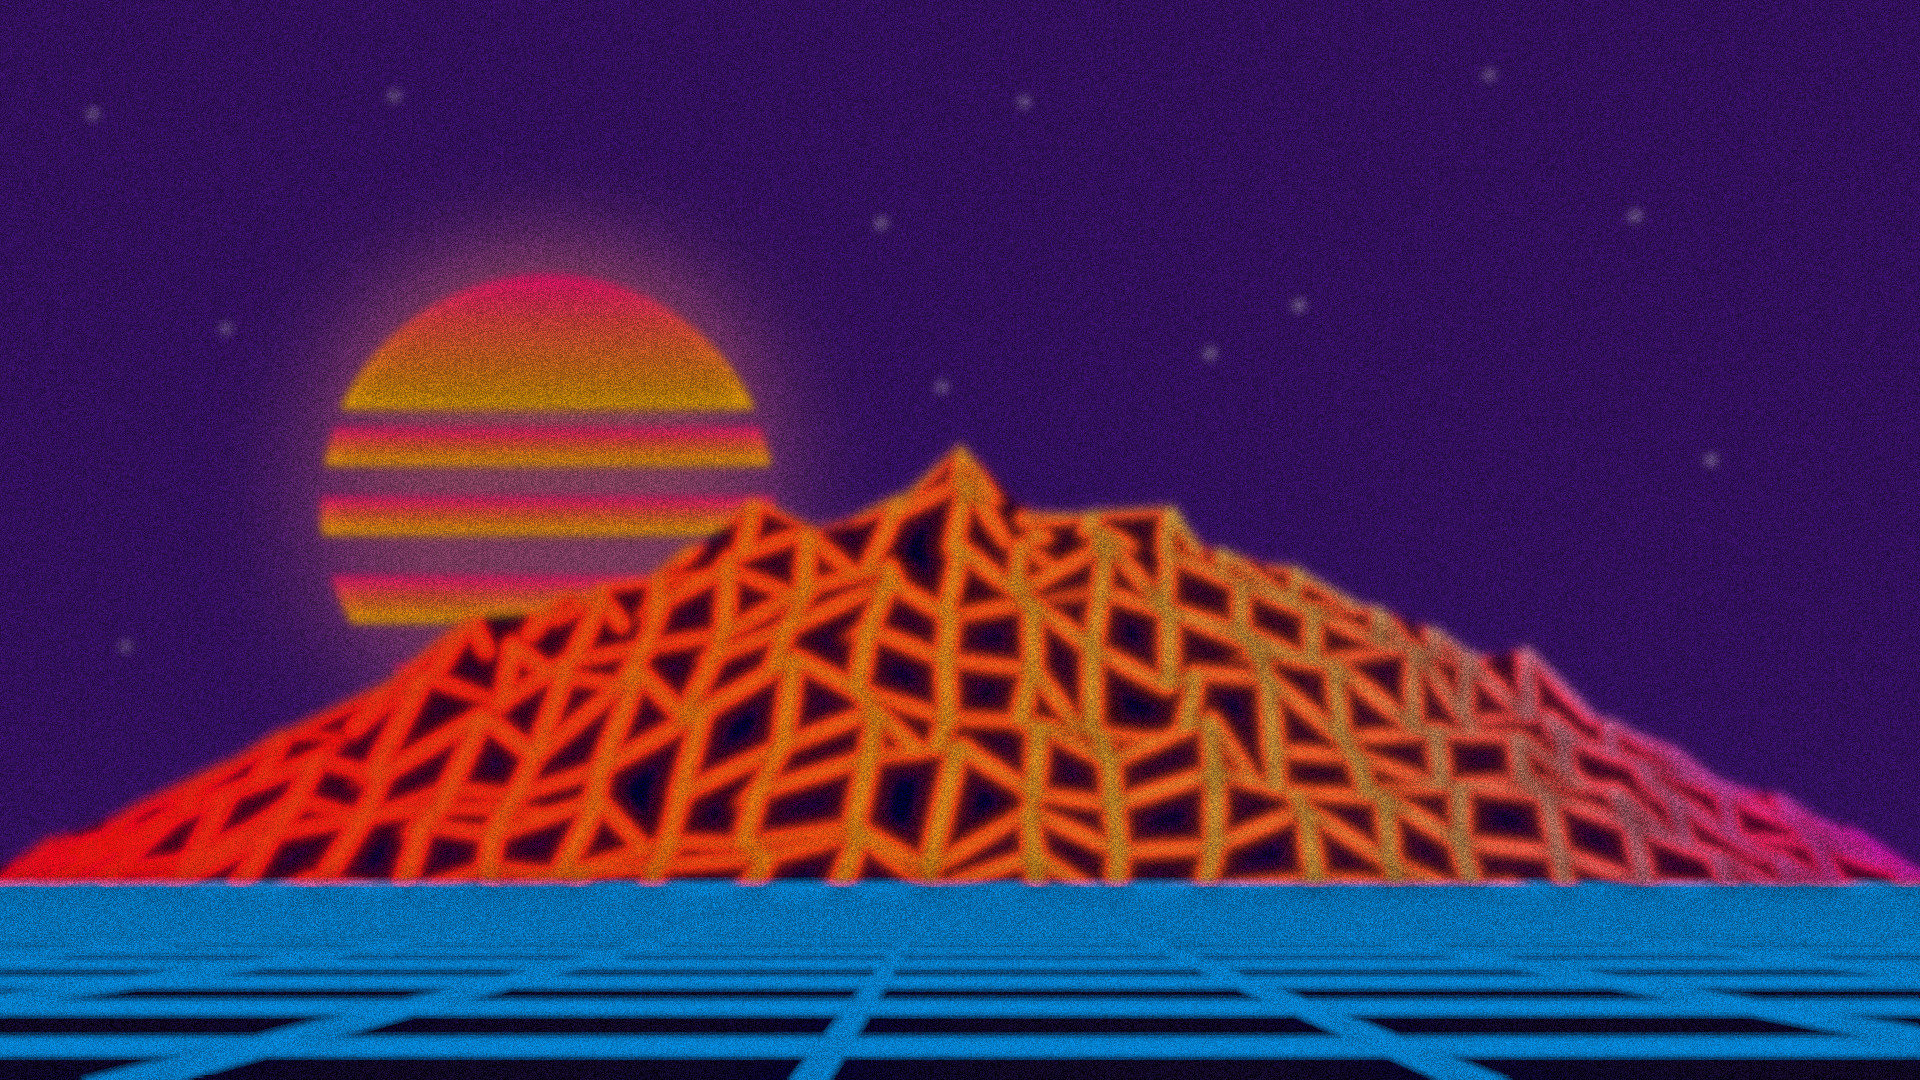 Best Retro Background Id - Retro Background For Computer - HD Wallpaper 